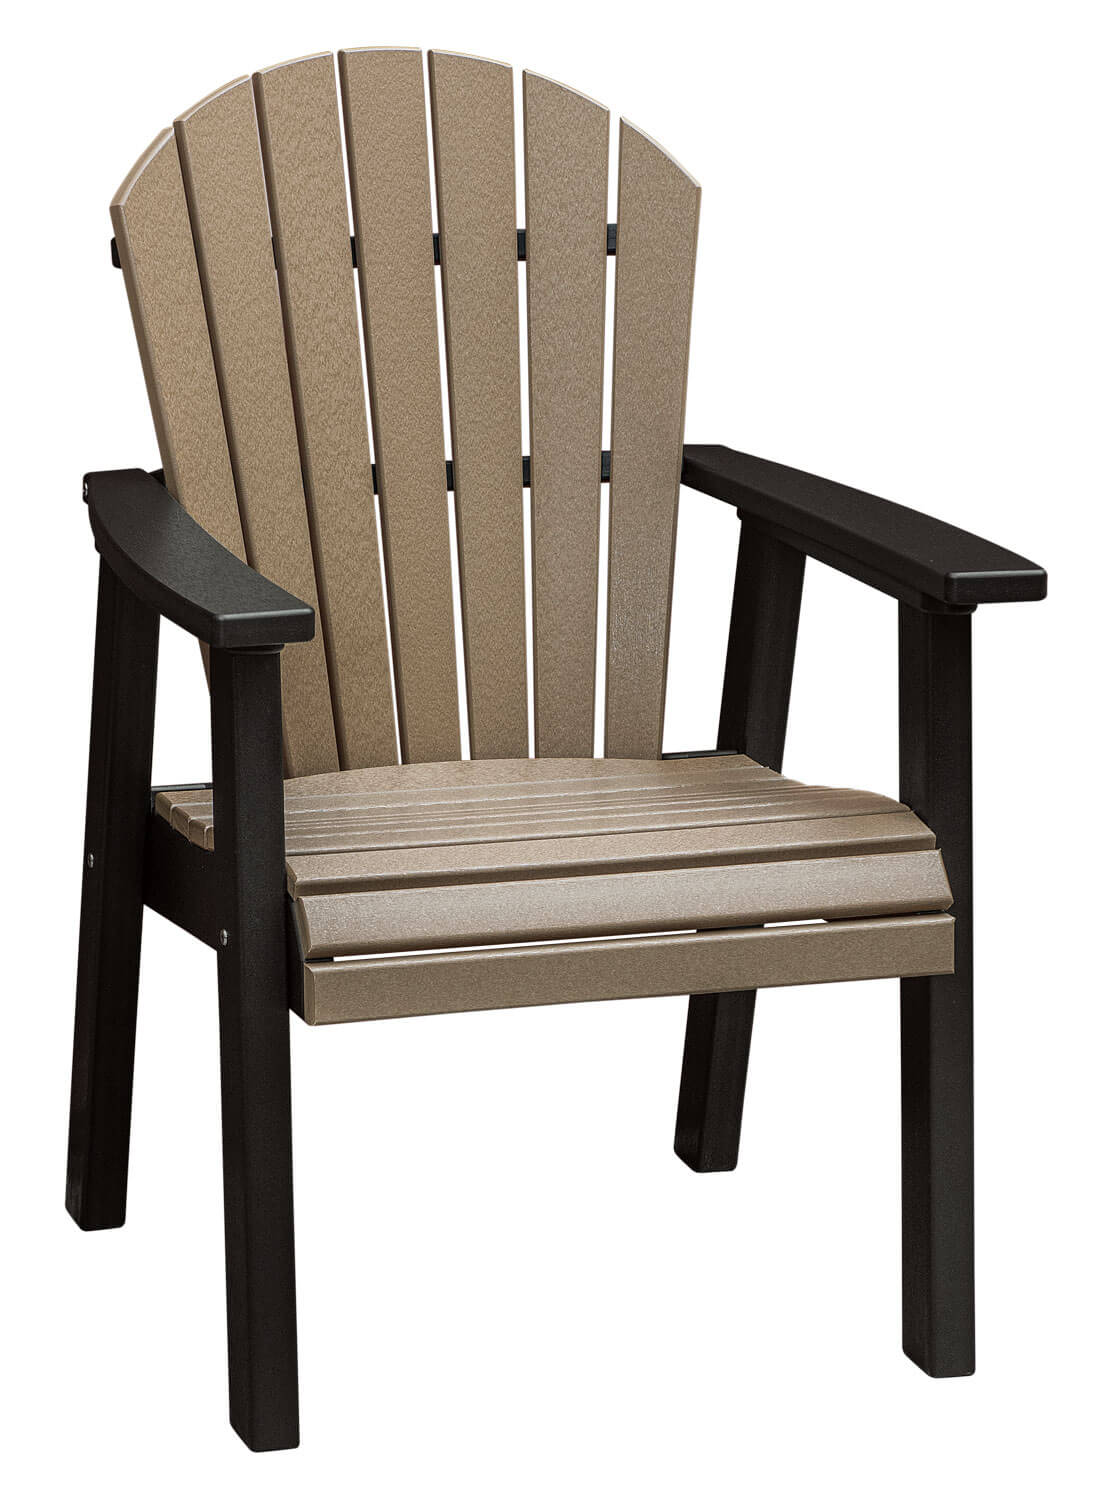 EC Woods Westbrook Outdoor Poly Dining Height Chair Shown in Weathered Wood and Black